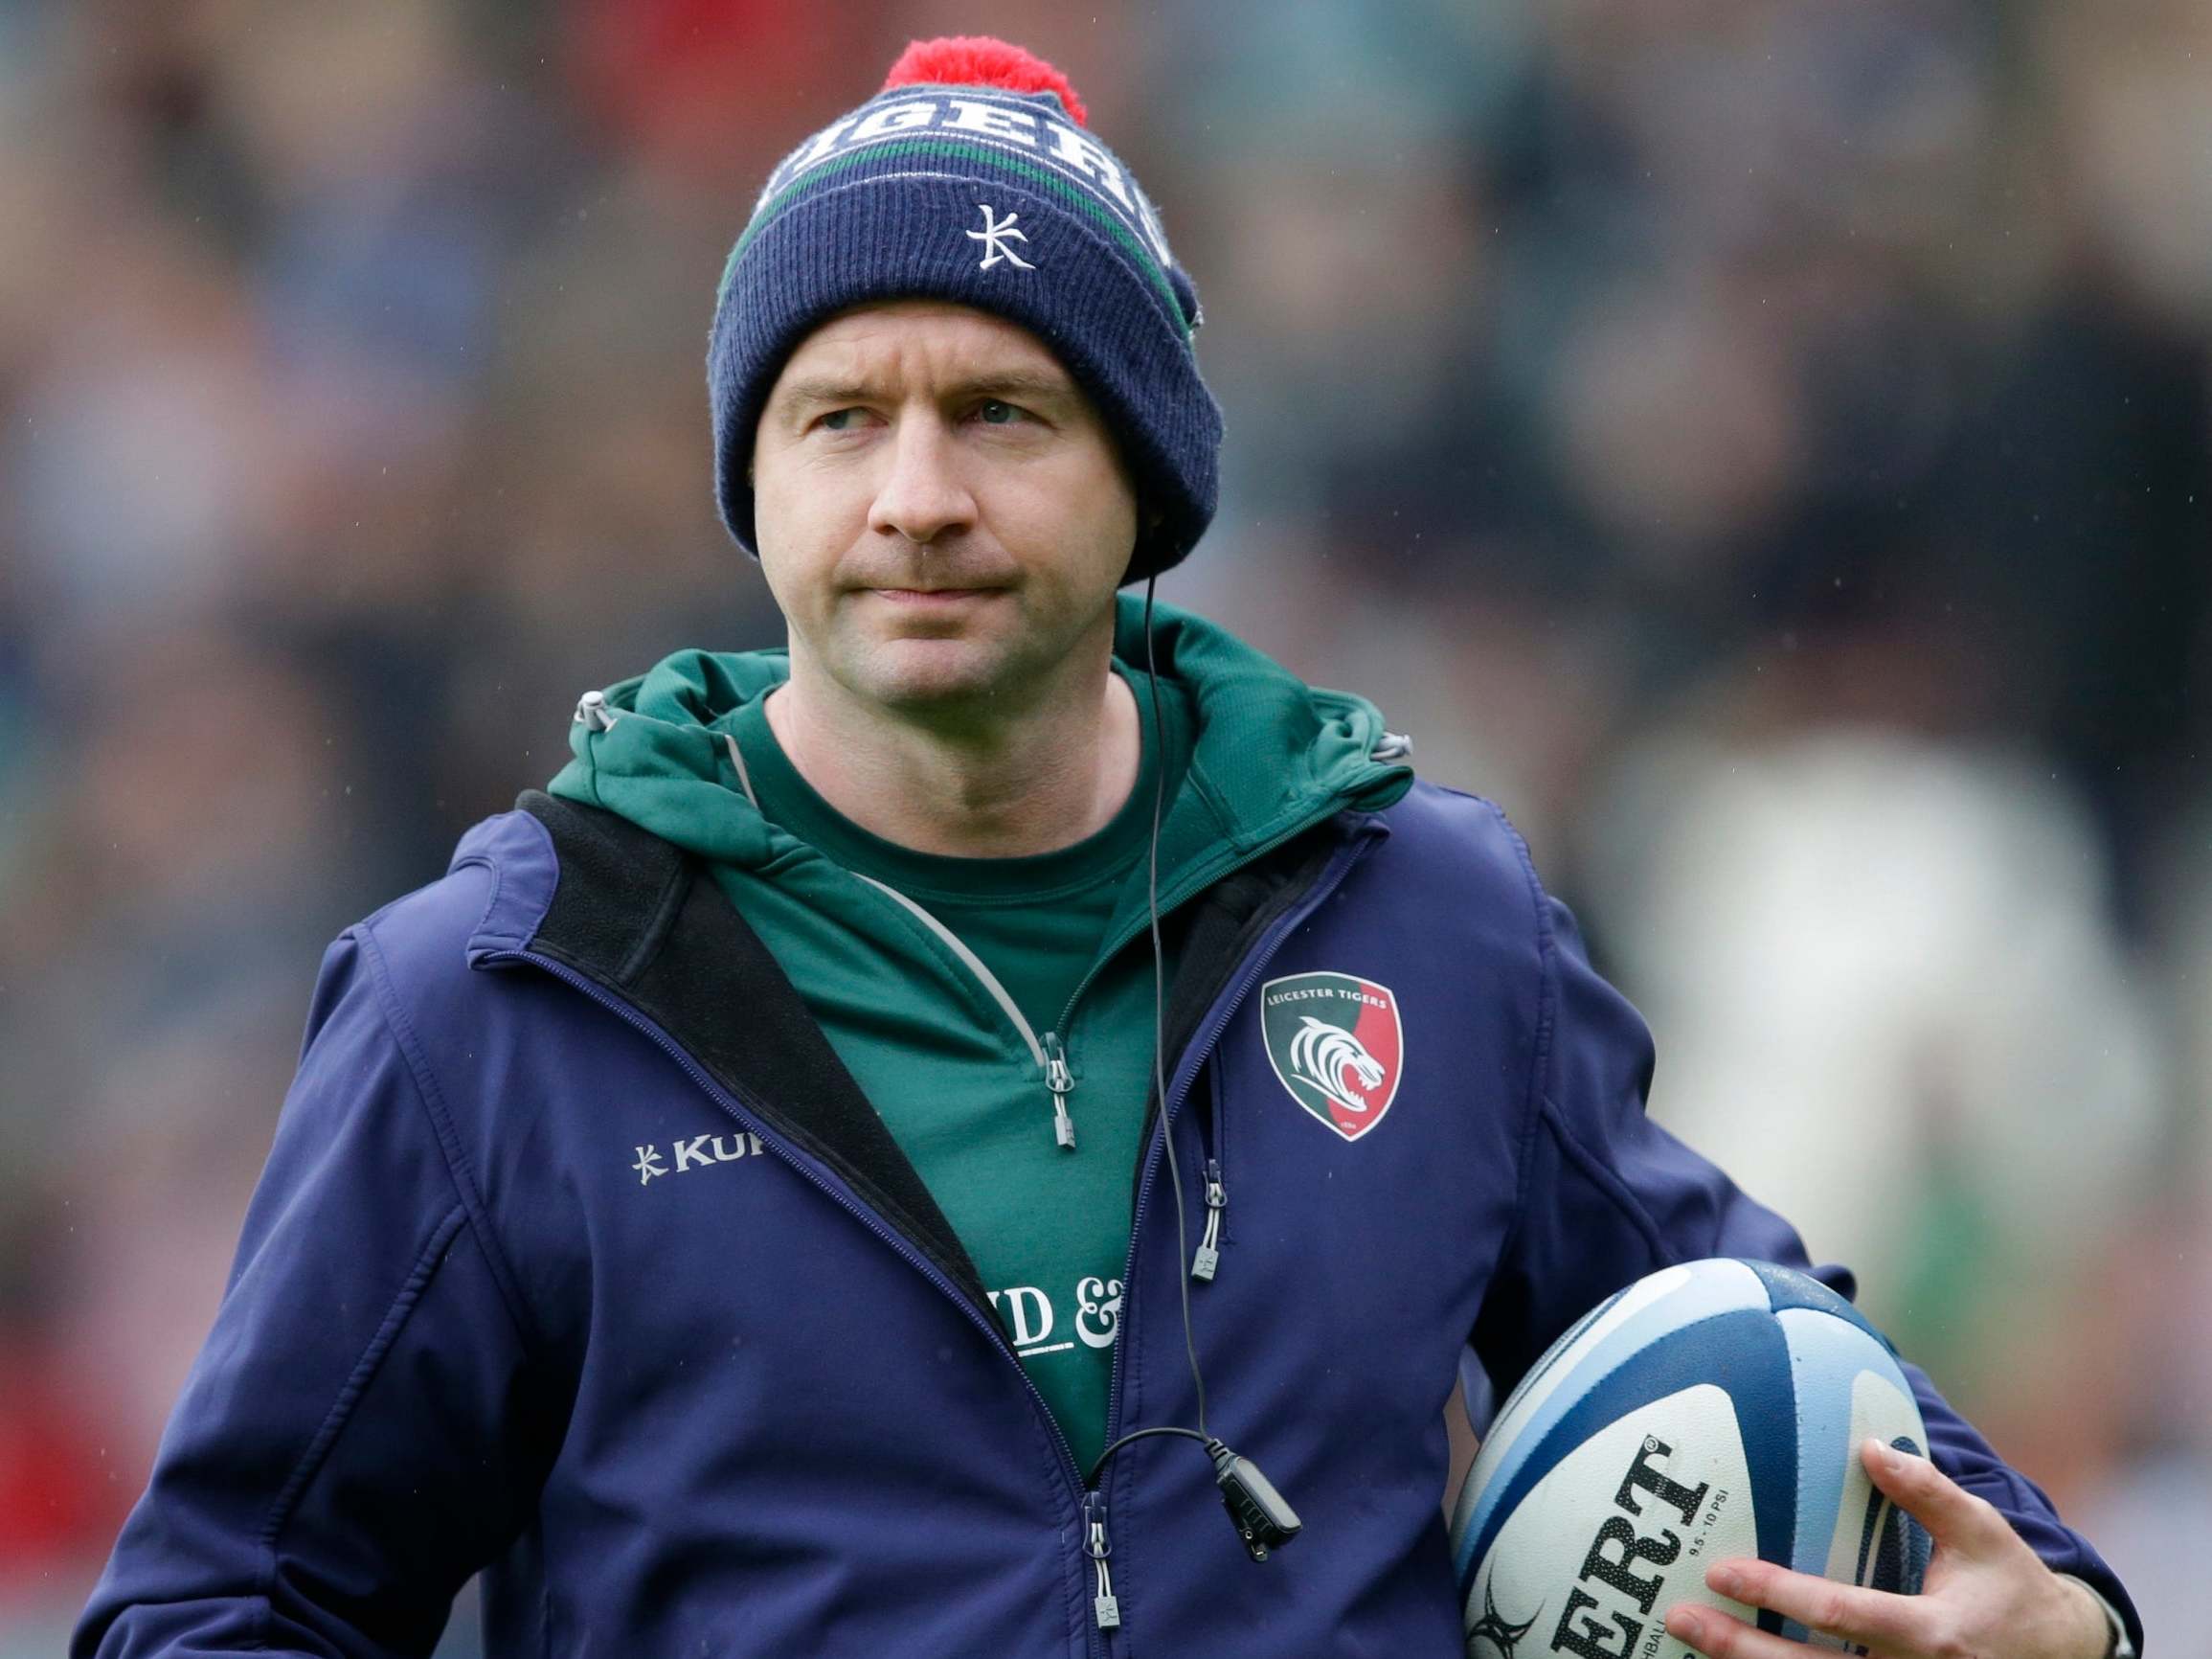 Geordan Murphy was promoted to head coach earlier this season in a bid to turnaround their form